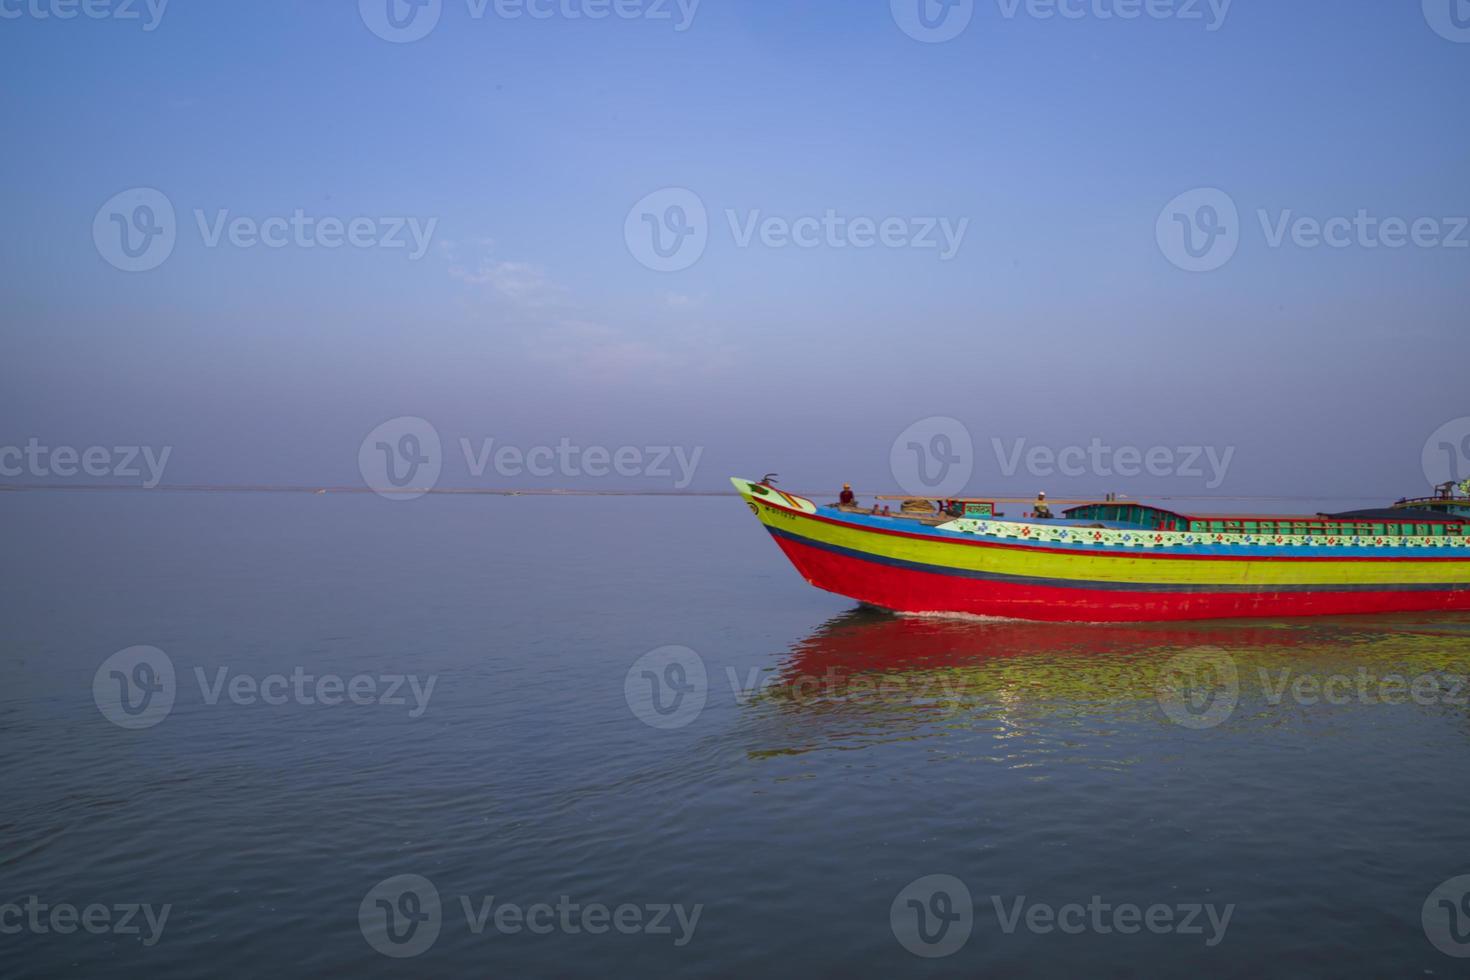 Landscape View of a small cargo ship against a blue sky on the  Padma river Bangladesh photo